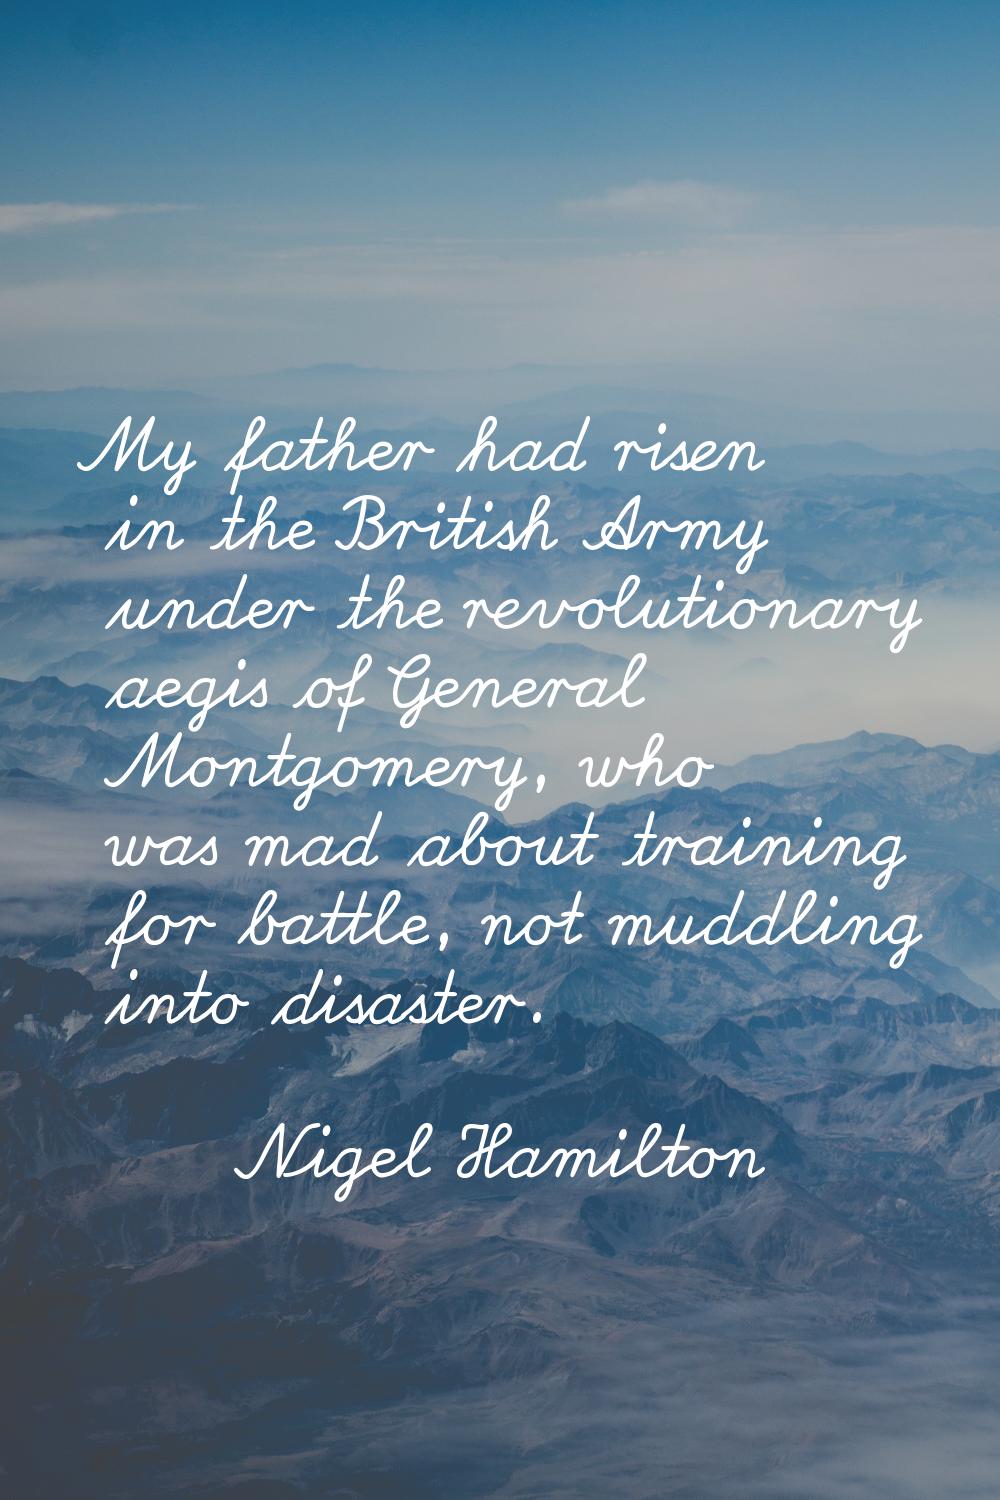 My father had risen in the British Army under the revolutionary aegis of General Montgomery, who wa